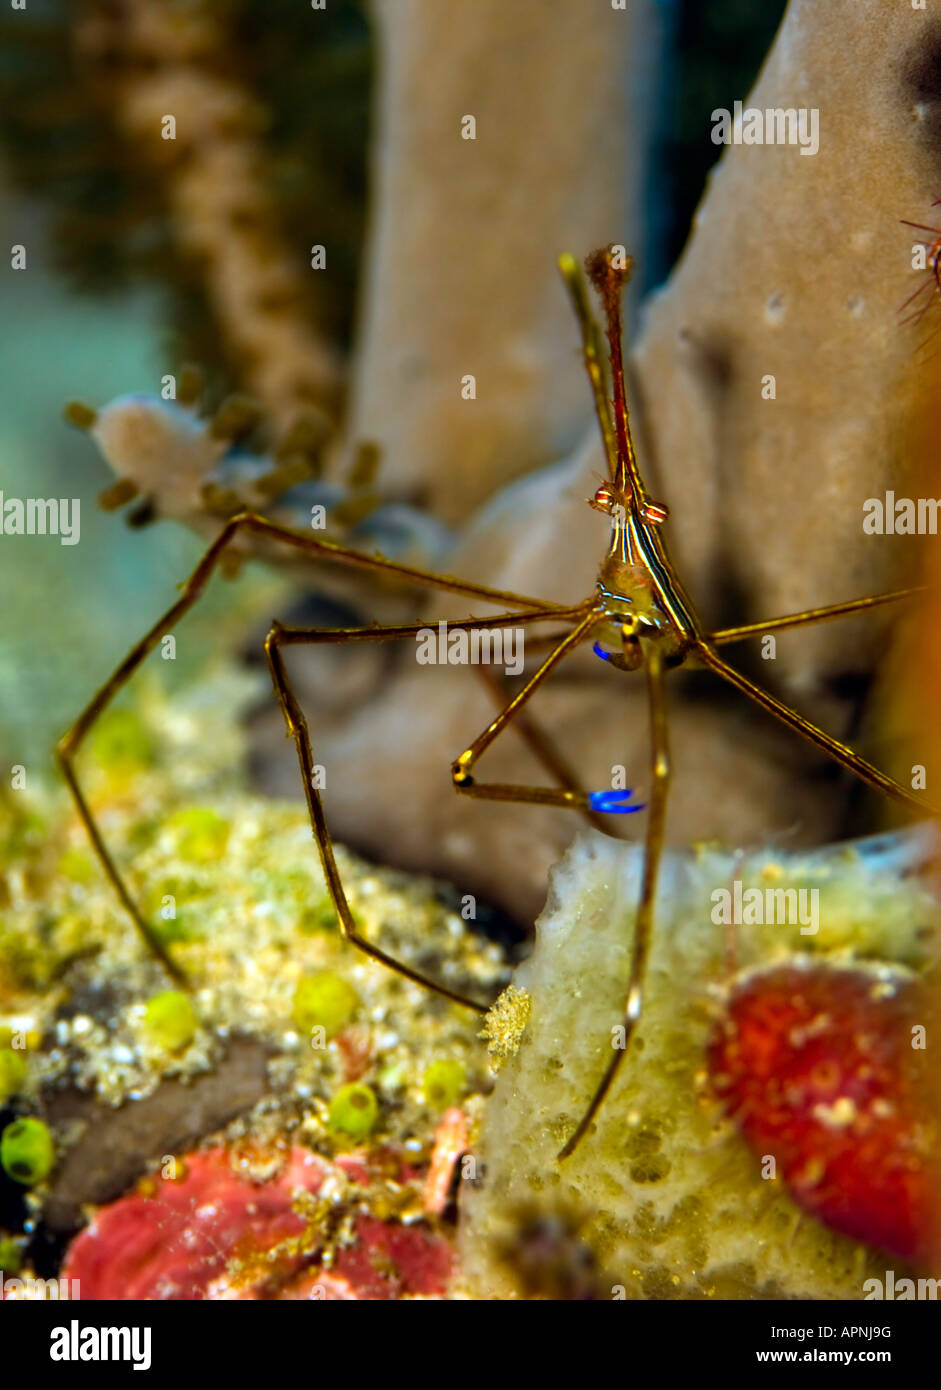 This tiny Yellowline Arrow Crab remains unconcerned when photographed near his home in a Florida coral reef. Stock Photo